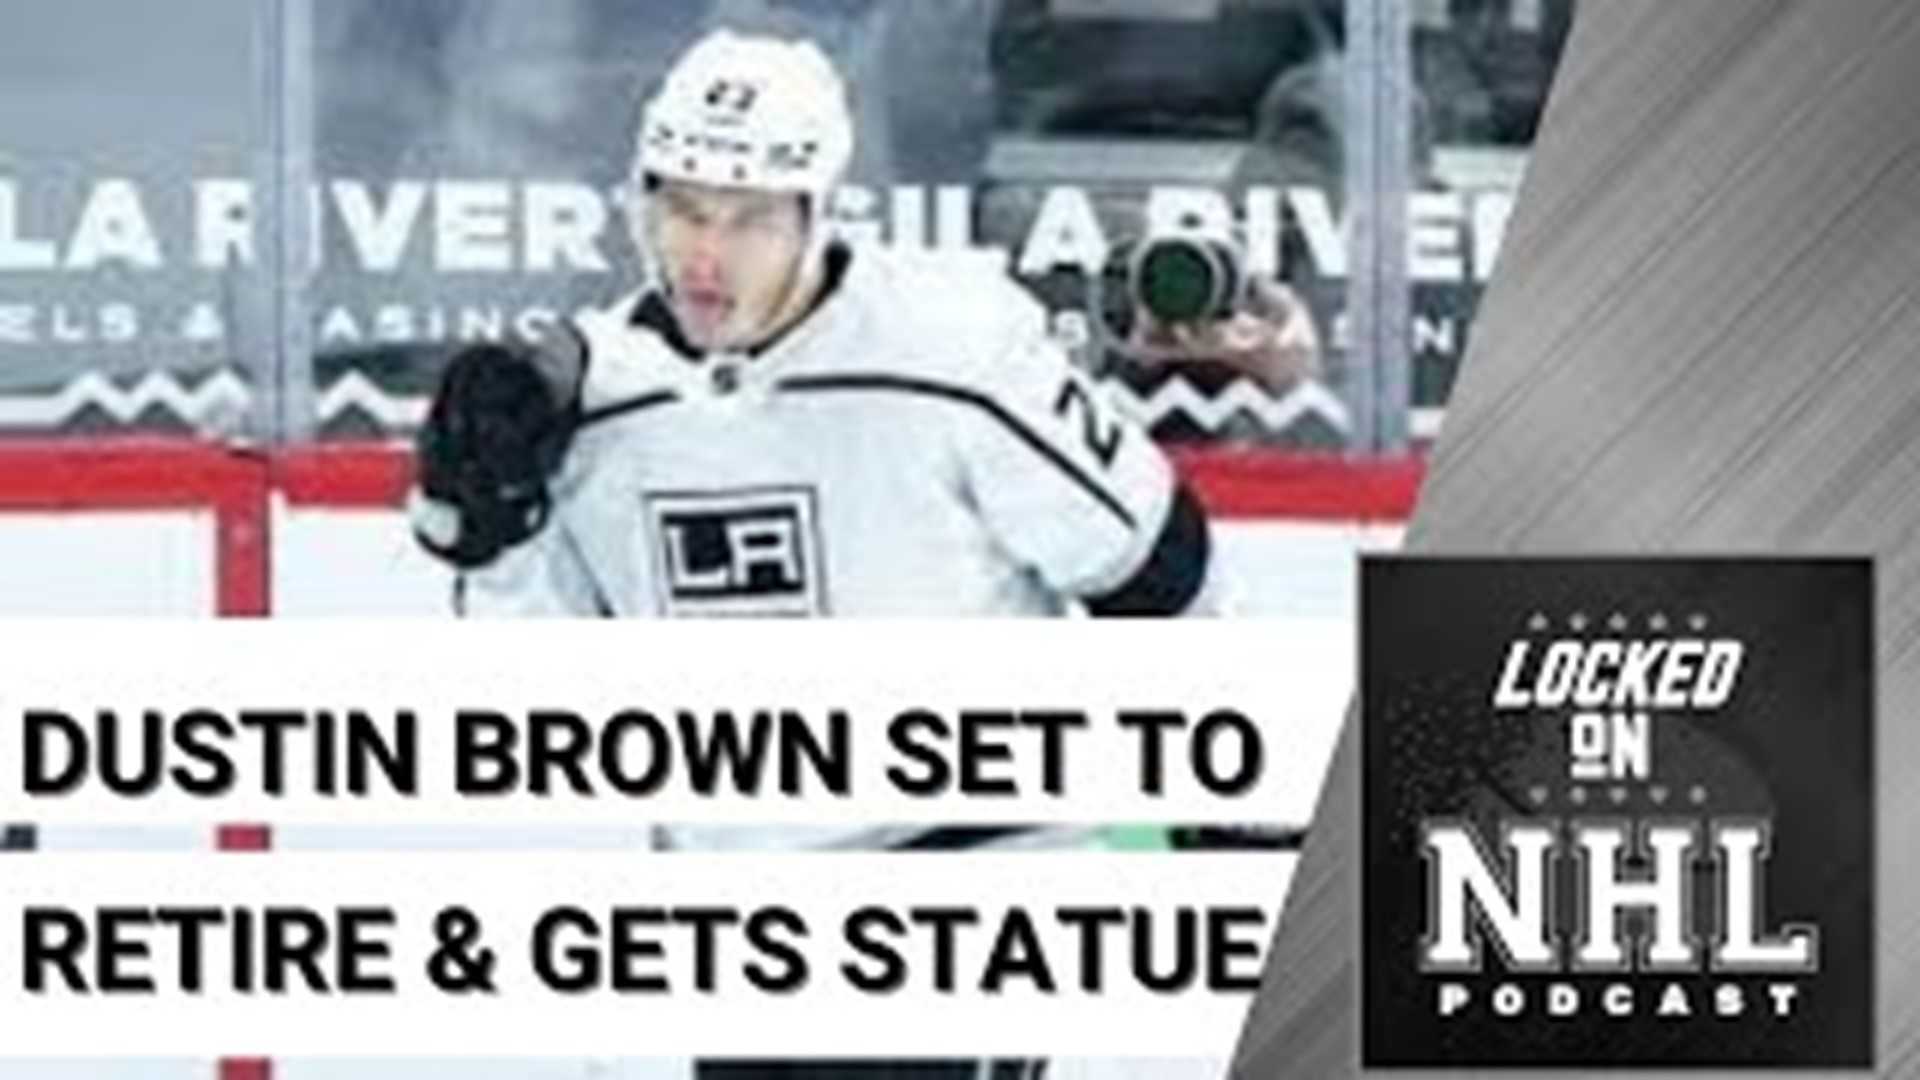 Kings great Dustin Brown 'left it all out there' – Daily News